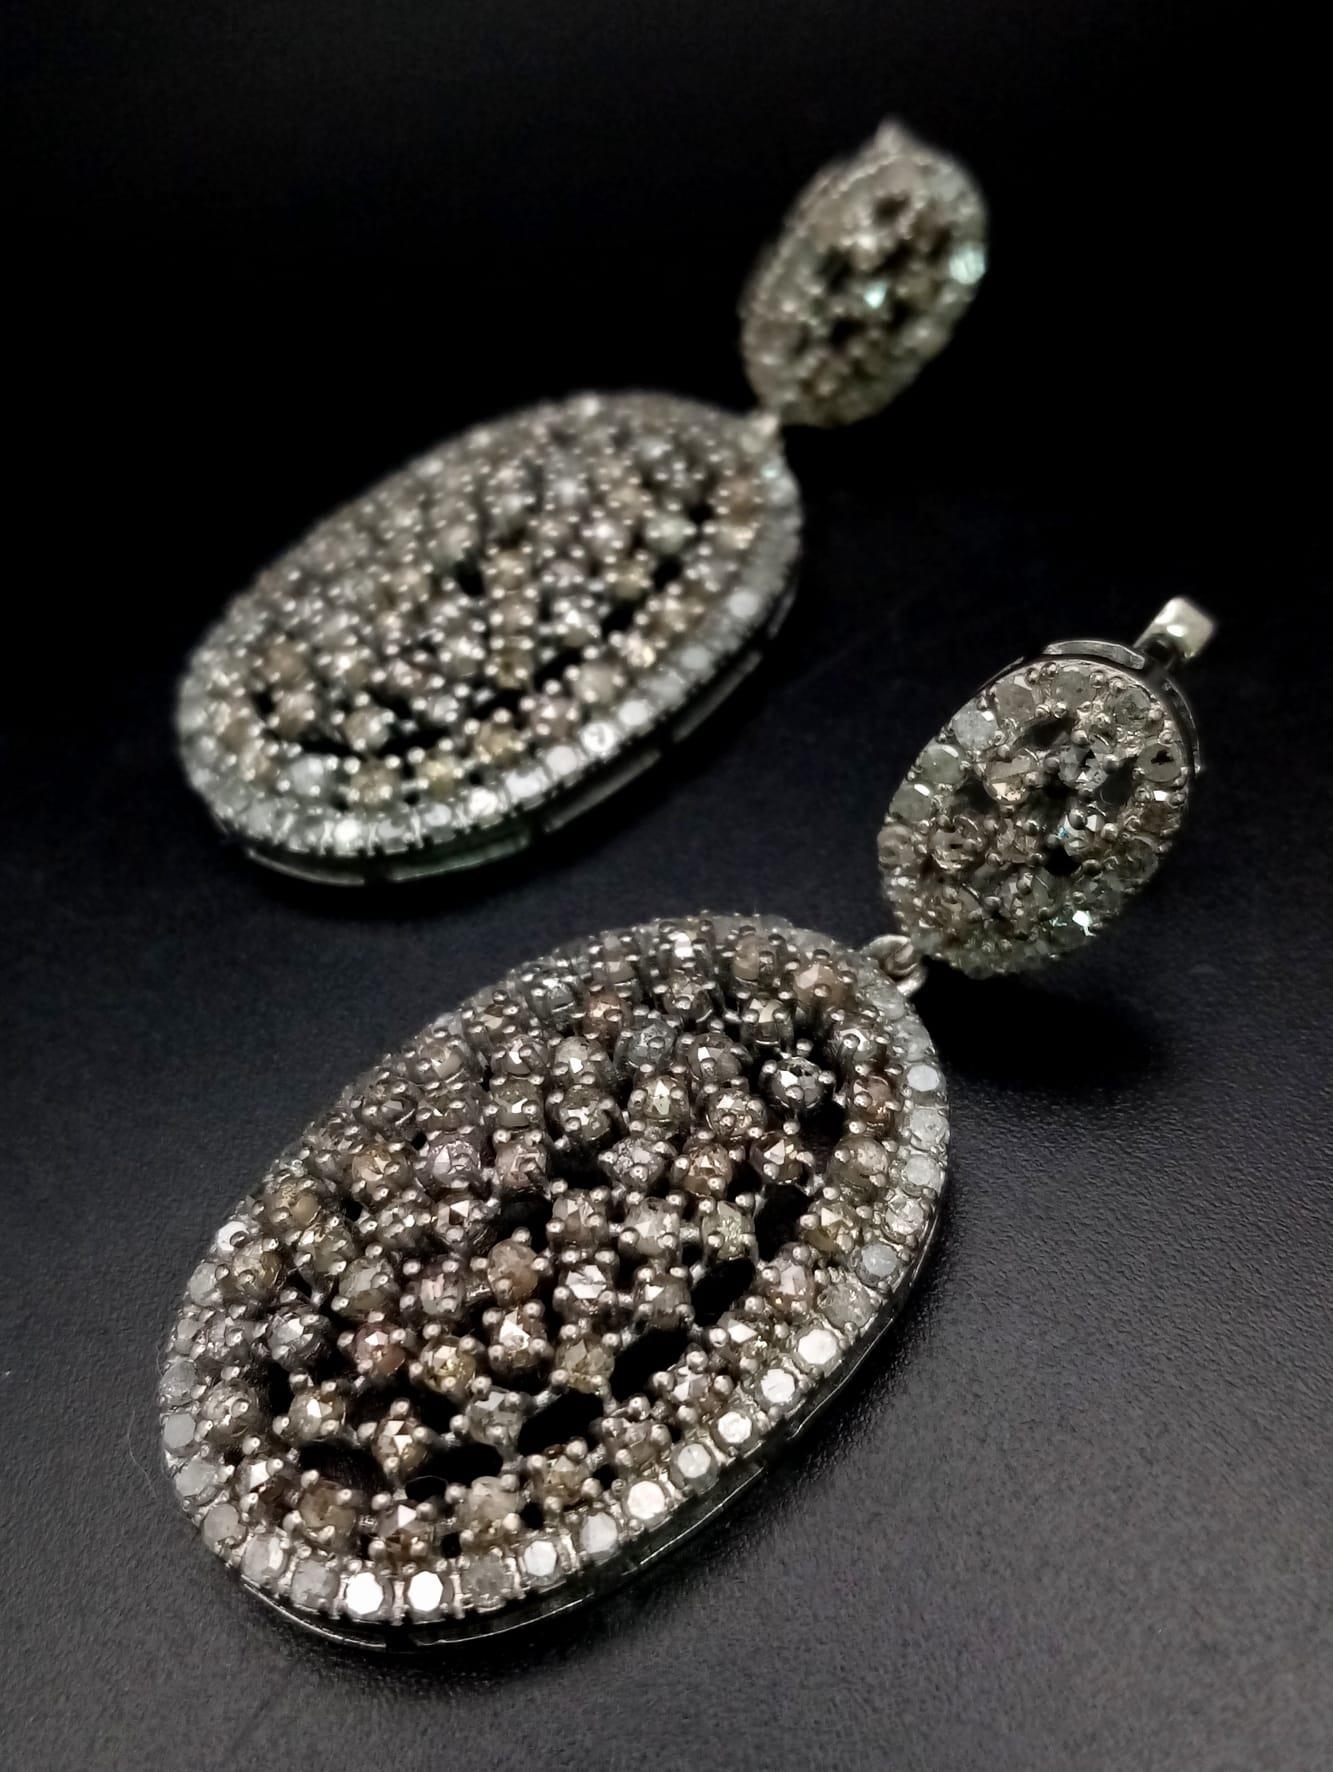 A Pair of Art Deco Style Old-Cut Diamond Cluster Drop Earrings in a 925 Silver Antique Finish. - Image 2 of 5